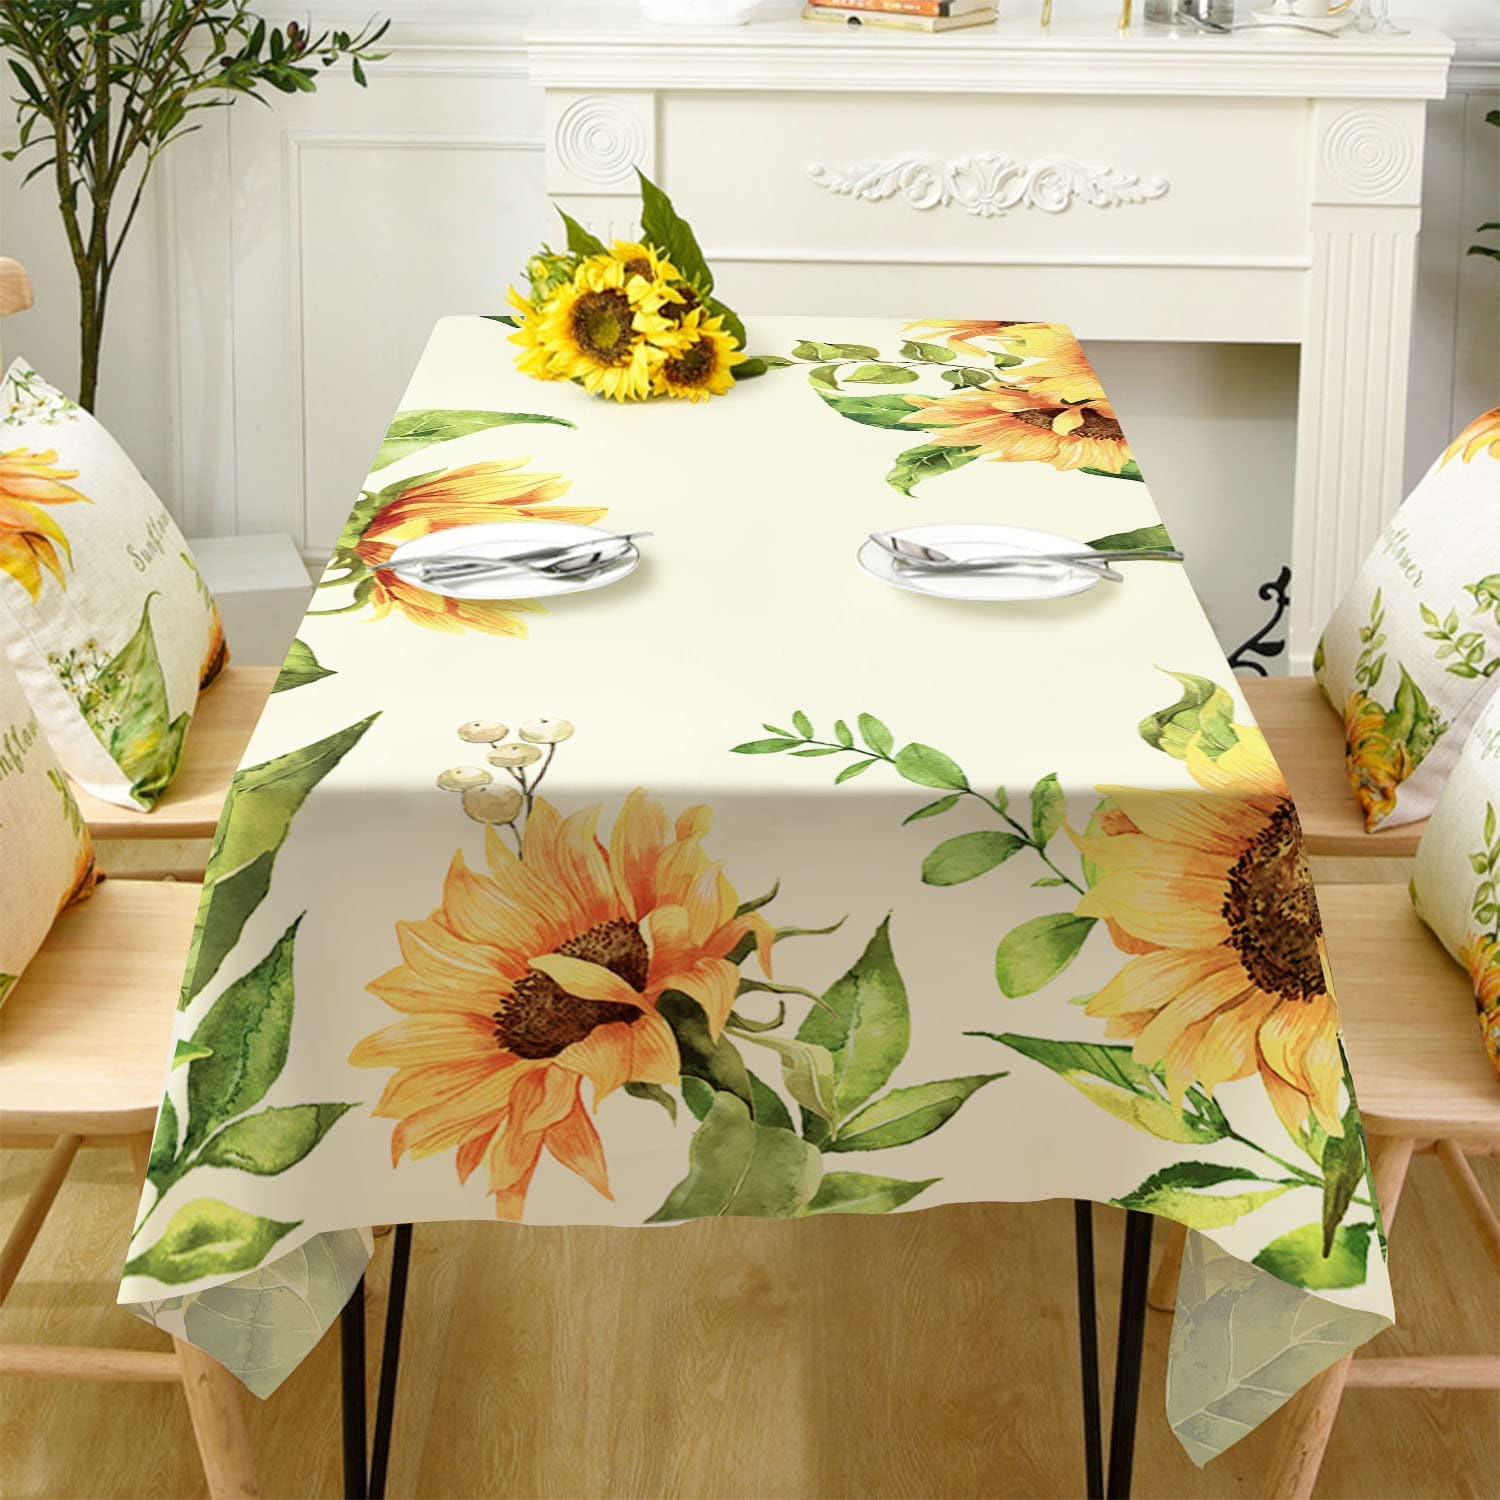 Table Cloth Rectangle Table, Stylish Dining Farmhouse Linen Tablecloth  Nappe Kitchen & Table Linens, Elegant Waterproof Table Cover, Table Cloths